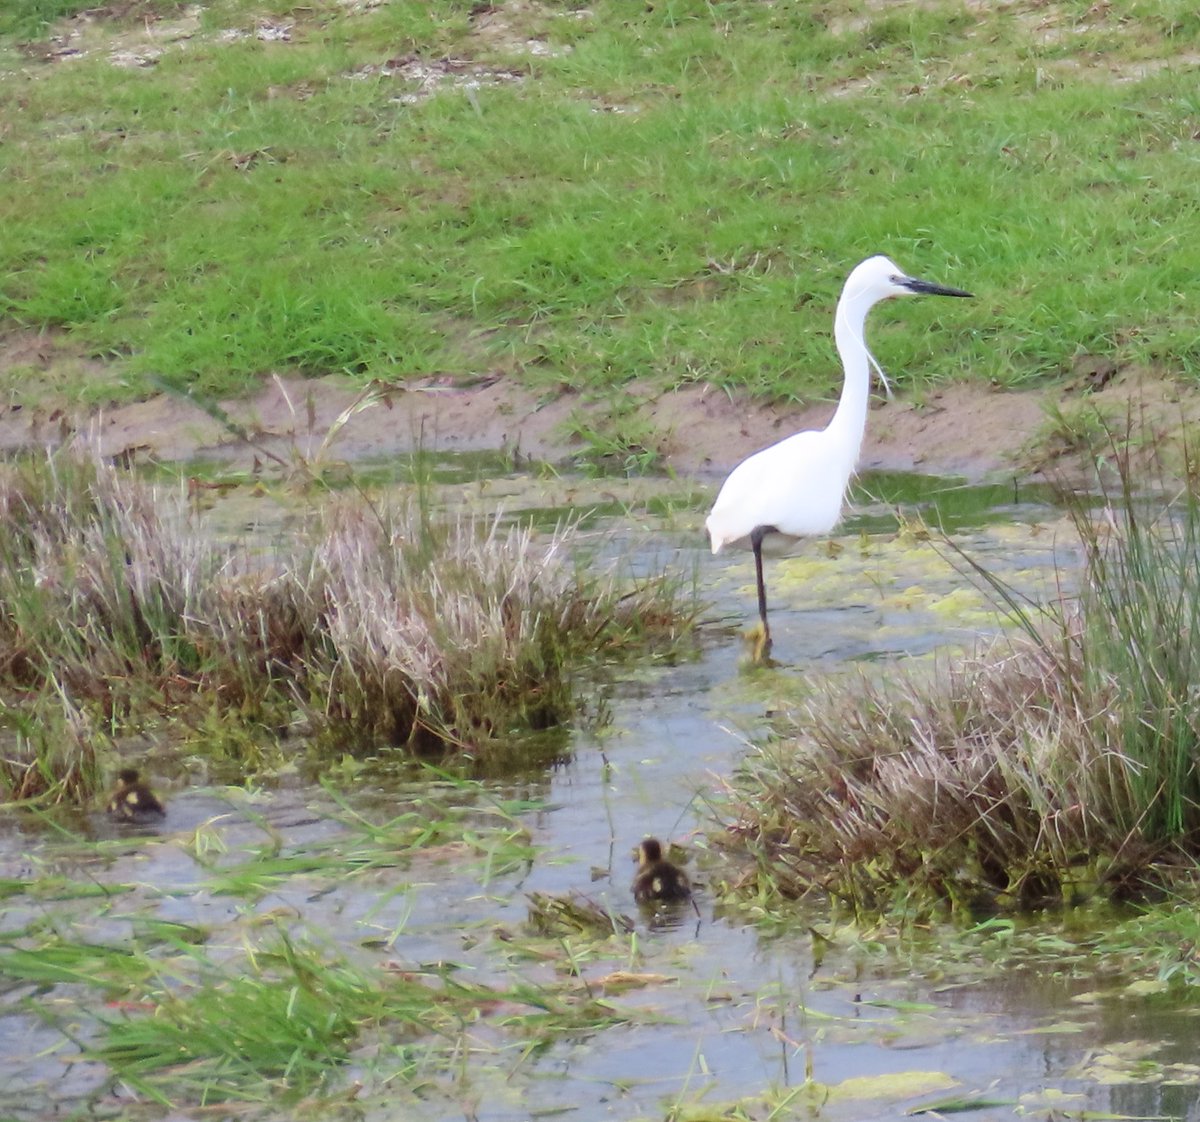 Do little egrets eat ducklings? Not on this occasion. The egret ran off in fright.